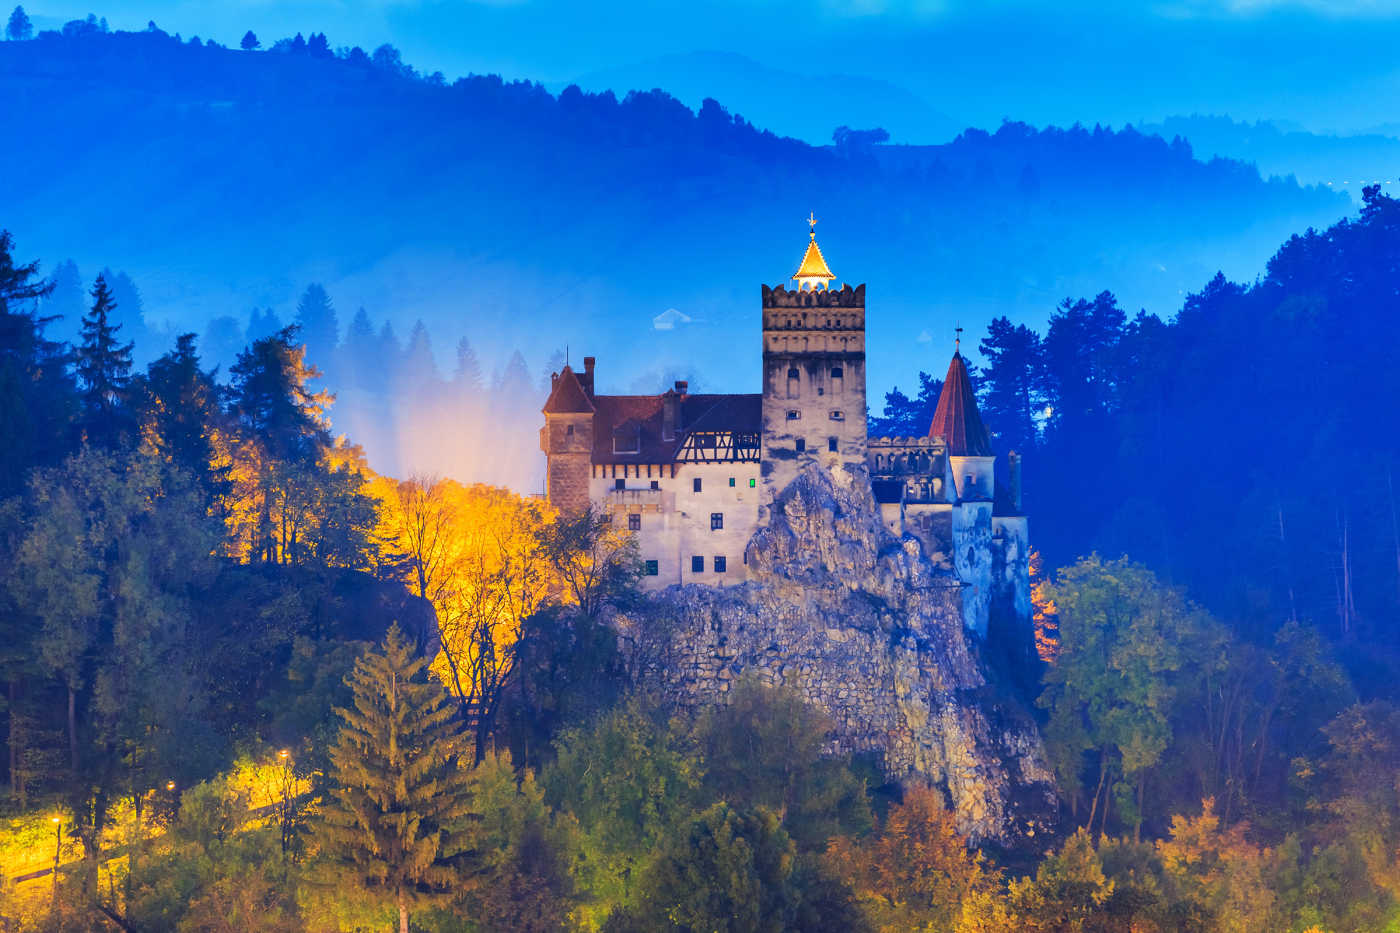 This country has the most castles in Europe